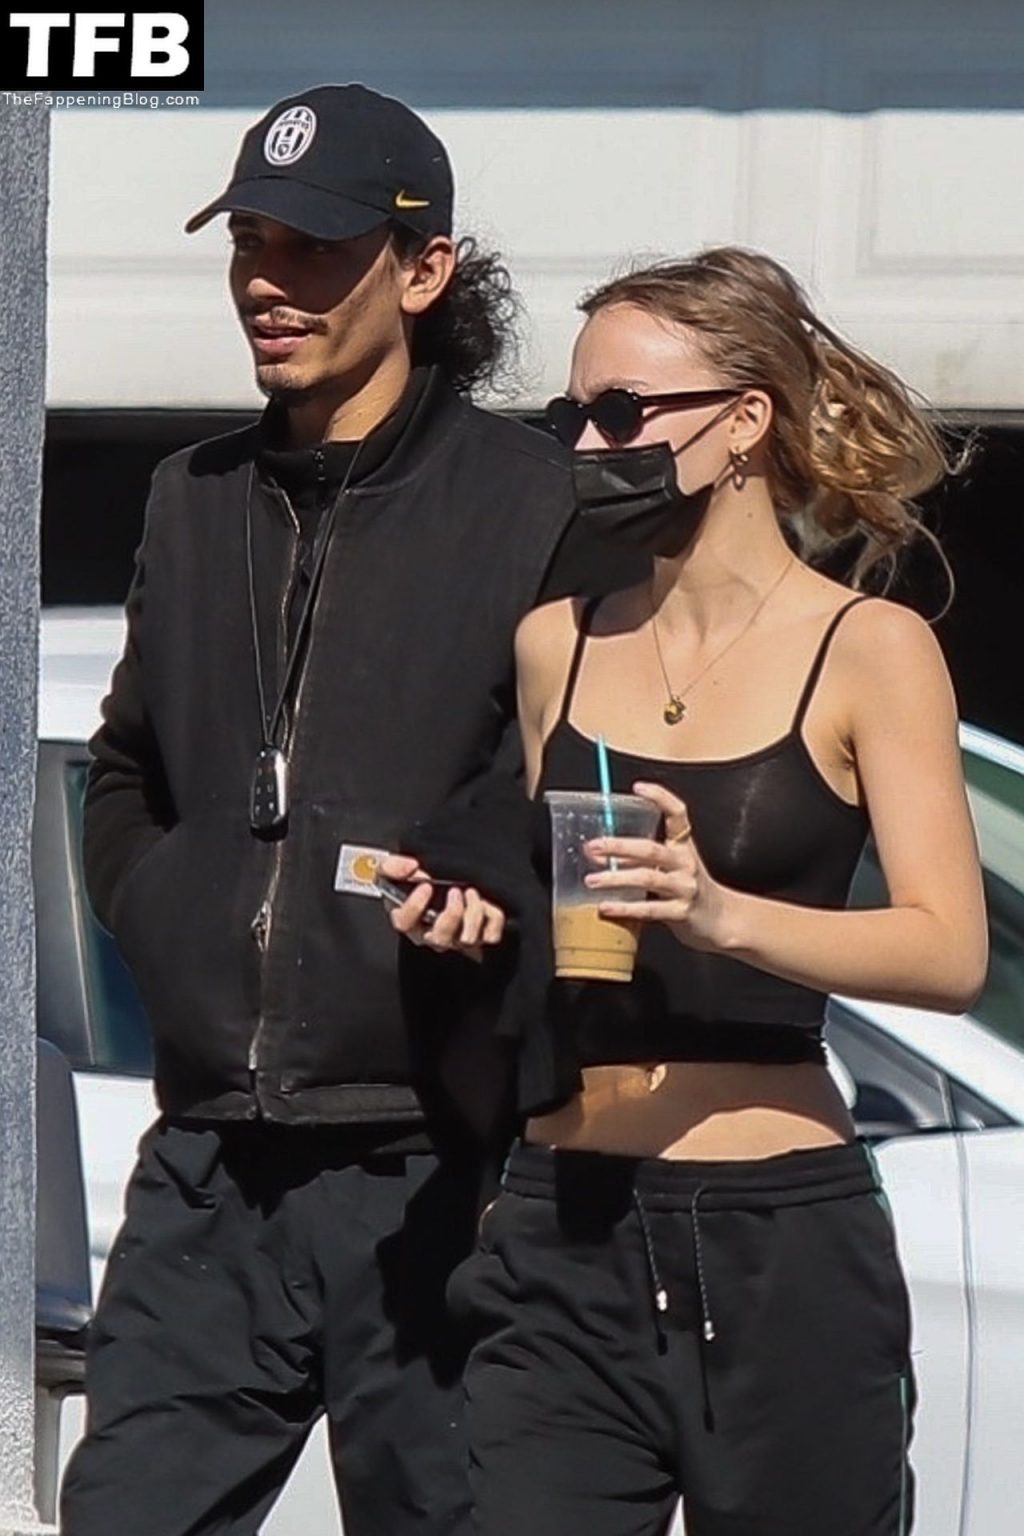 Braless Lily-Rose Depp and Her Boyfriend Yassine Stein Share Some PDA Before Getting Burgers (16 Photos)